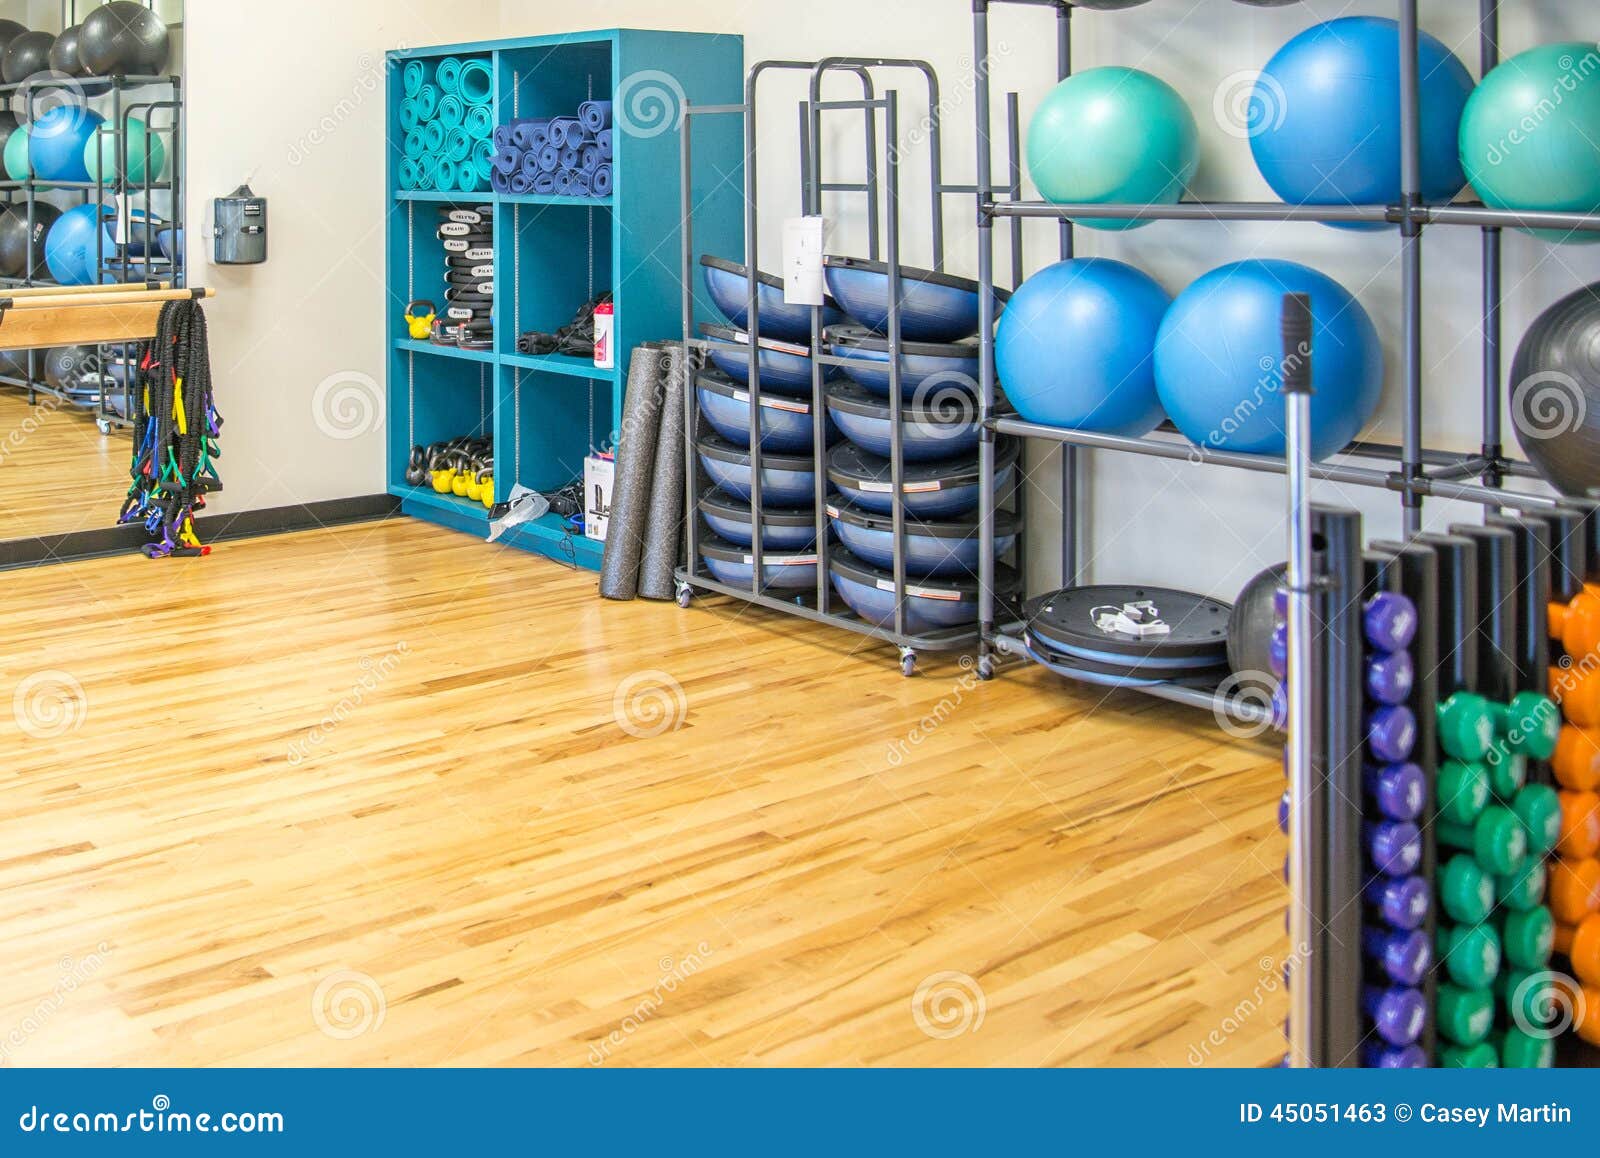 exercise room mats